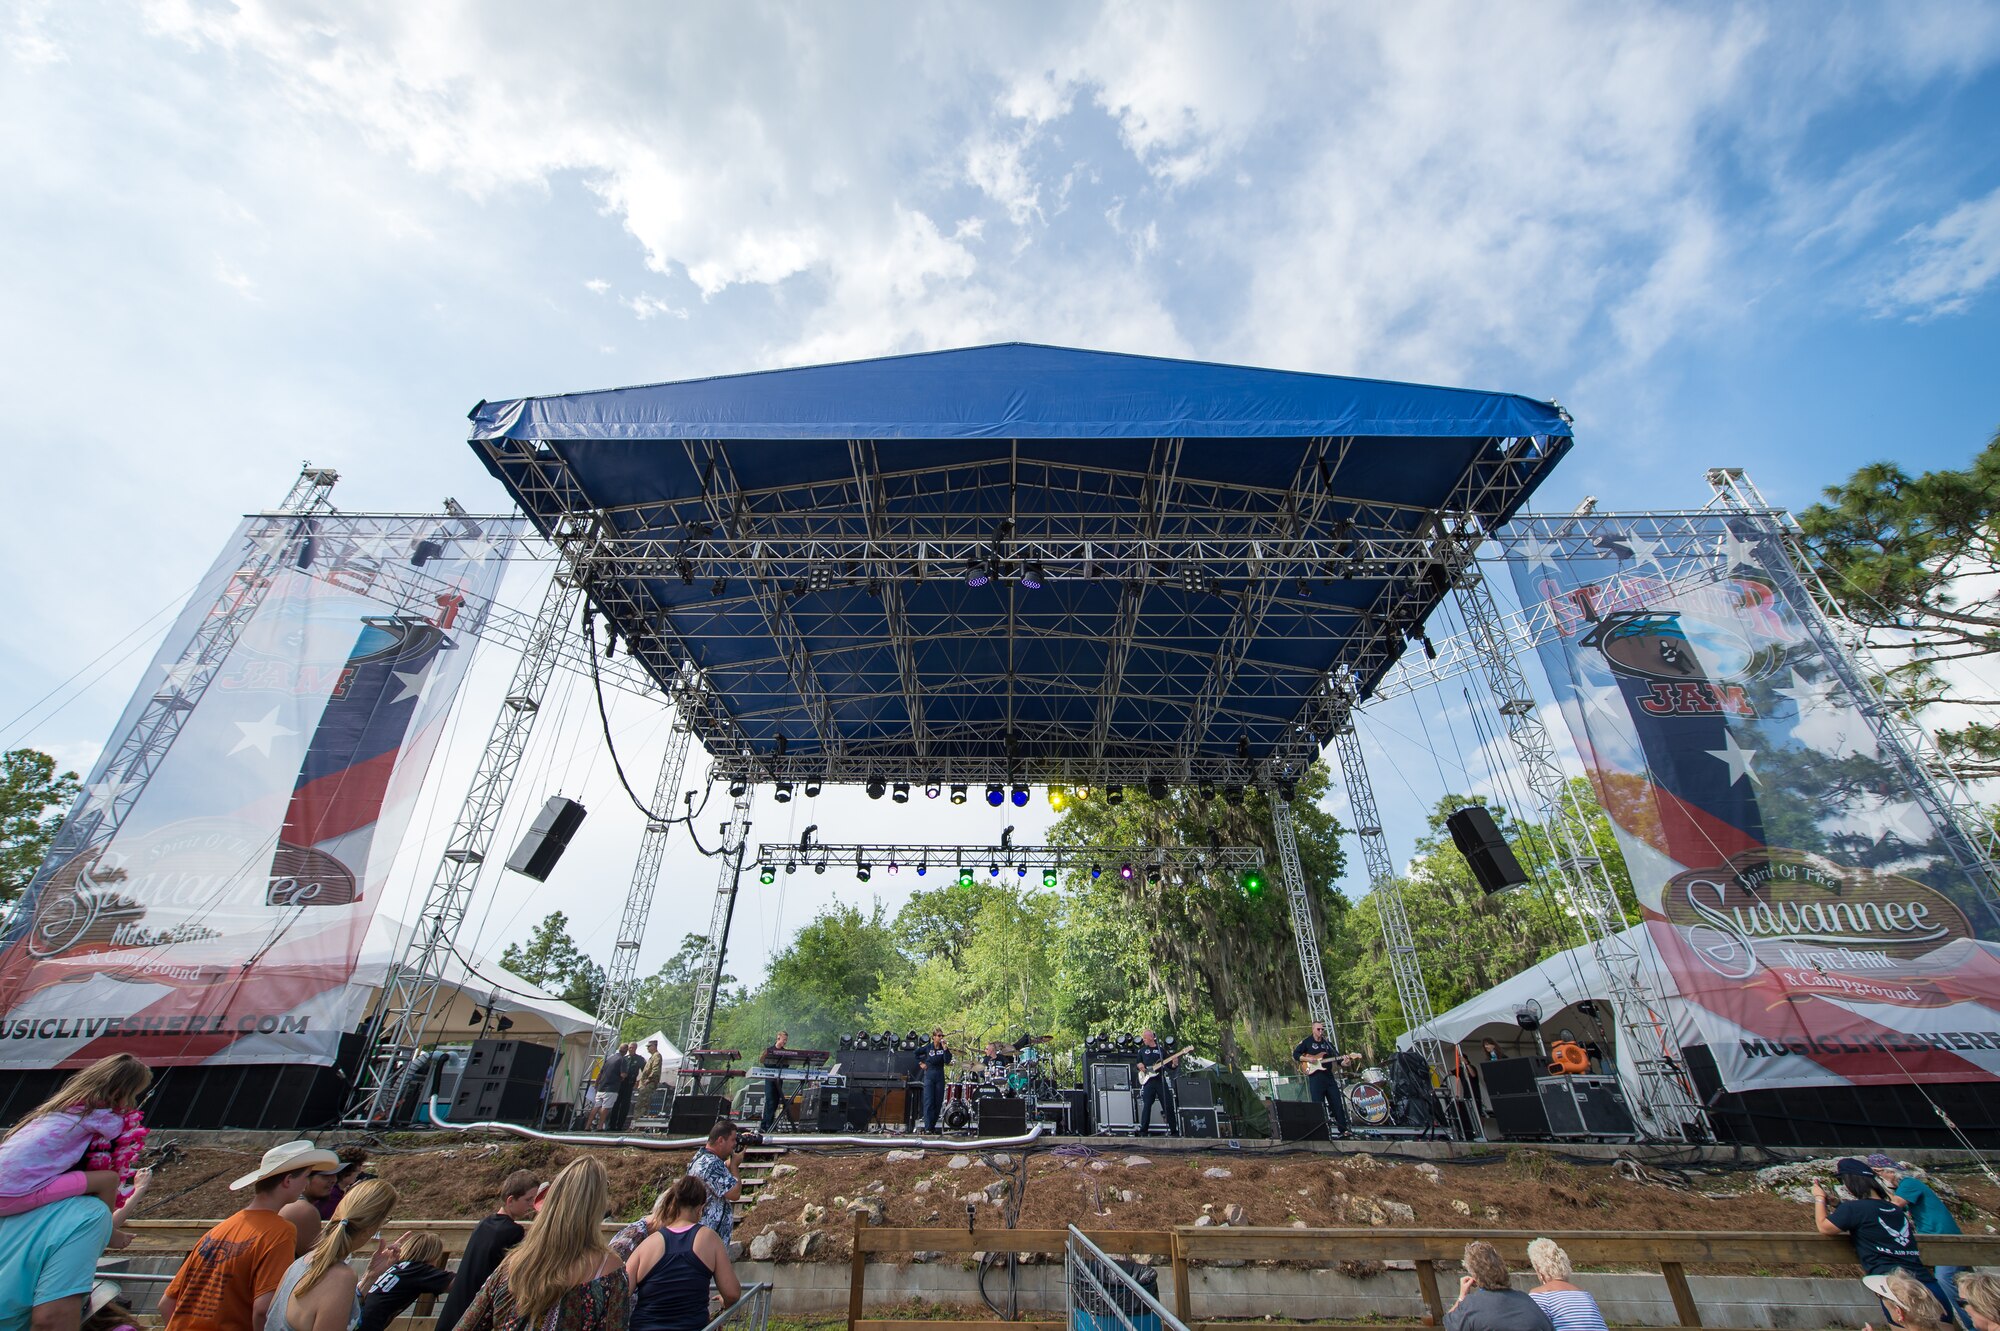 Max Impact performs for country music fans as part of the Armed Forces Tribute at the 2019 Suwannee River Jam. This event took place at the Spirit of the Suwannee Music Park on Saturday, May 4, 2019. (U.S. Air Force Photo by Chief Master Sgt. Kevin Burns)